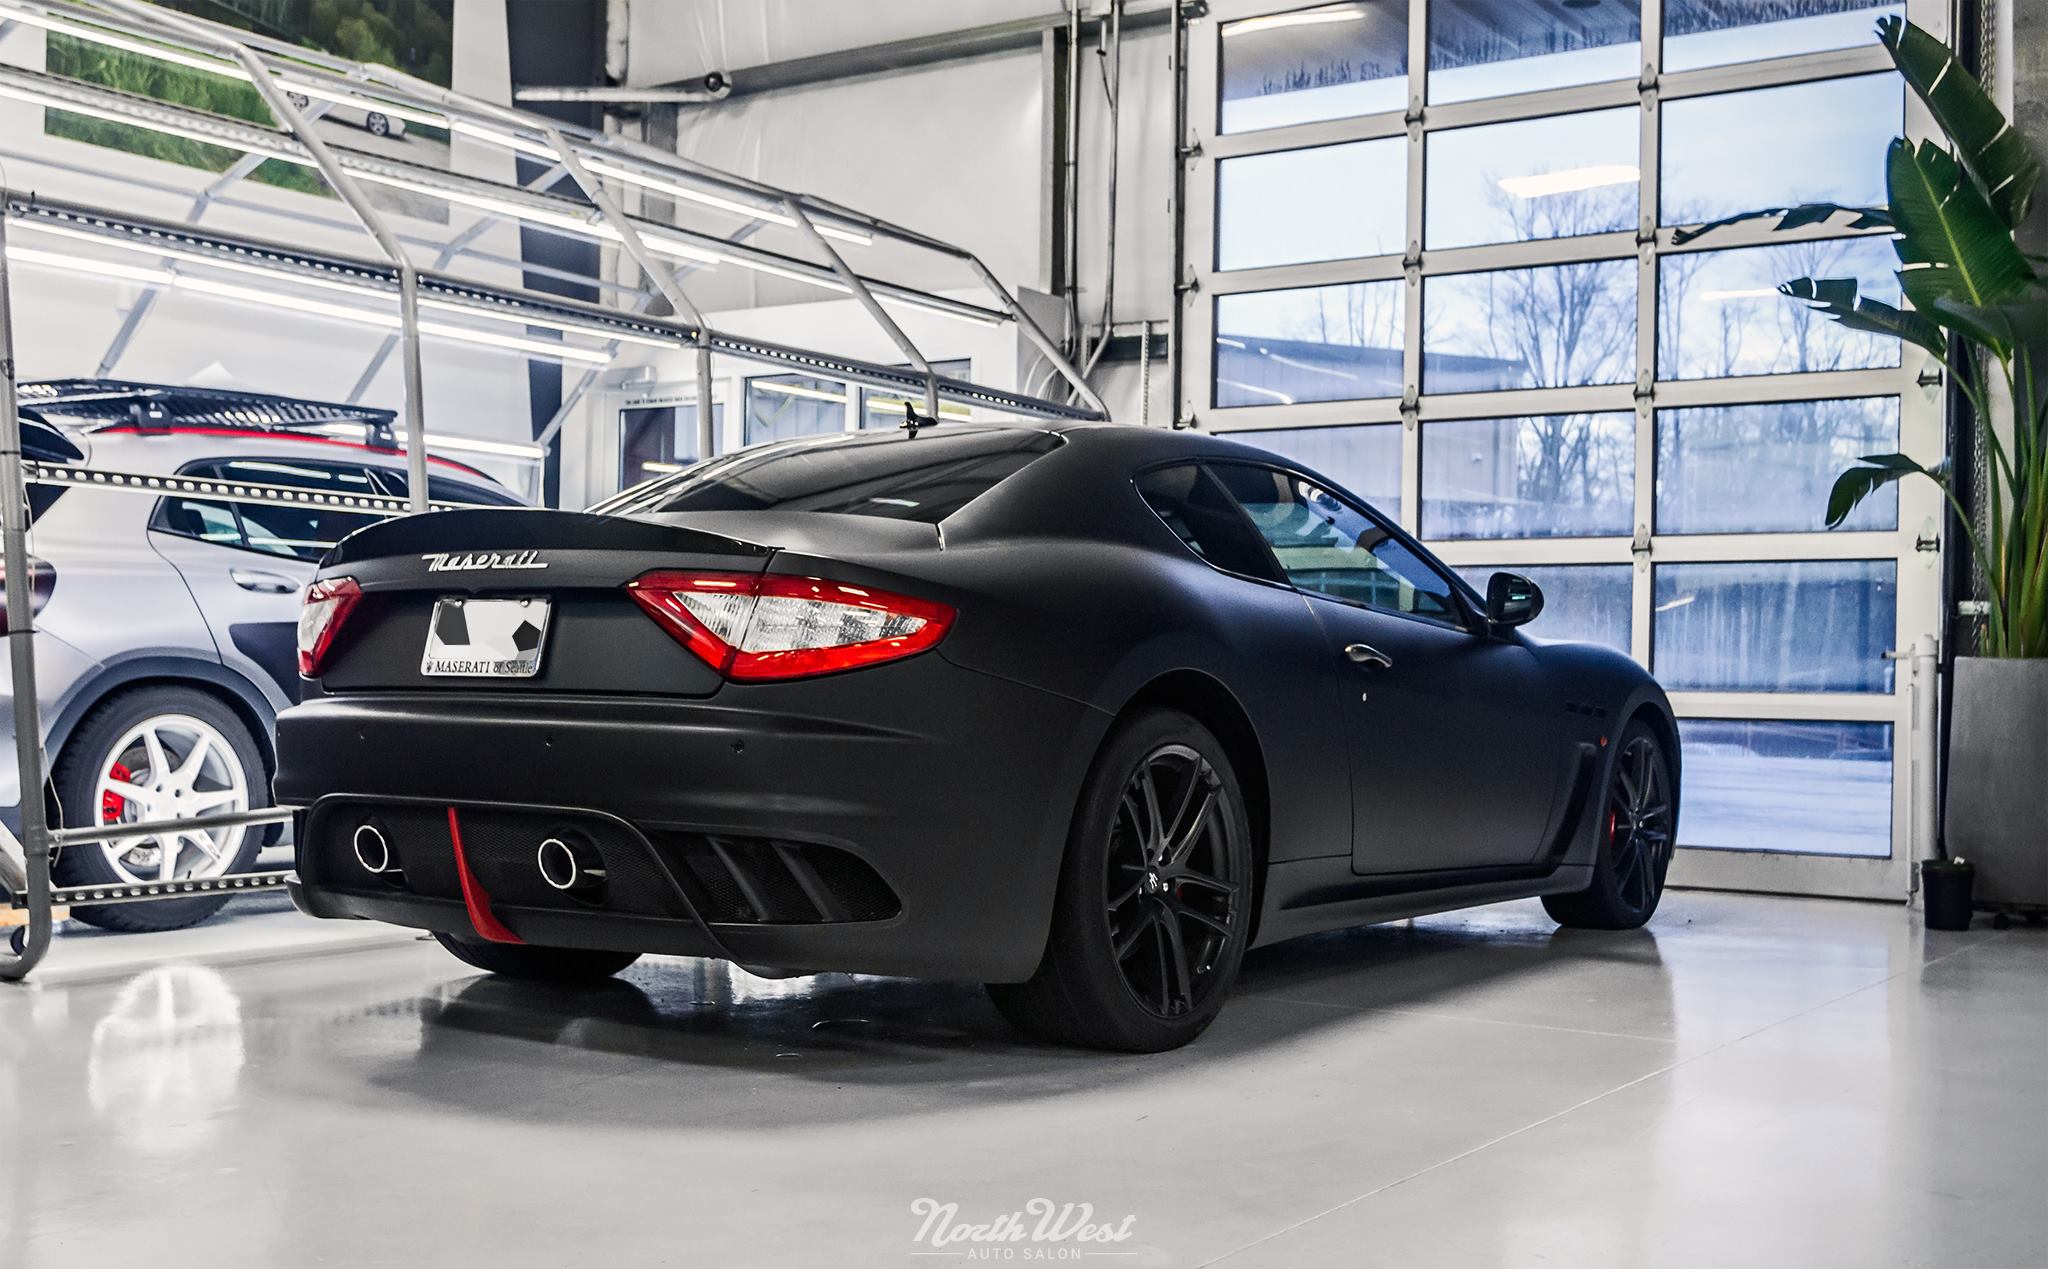 Wraptor Graphix - Graphic Design for the Wrap Industry - Maserati